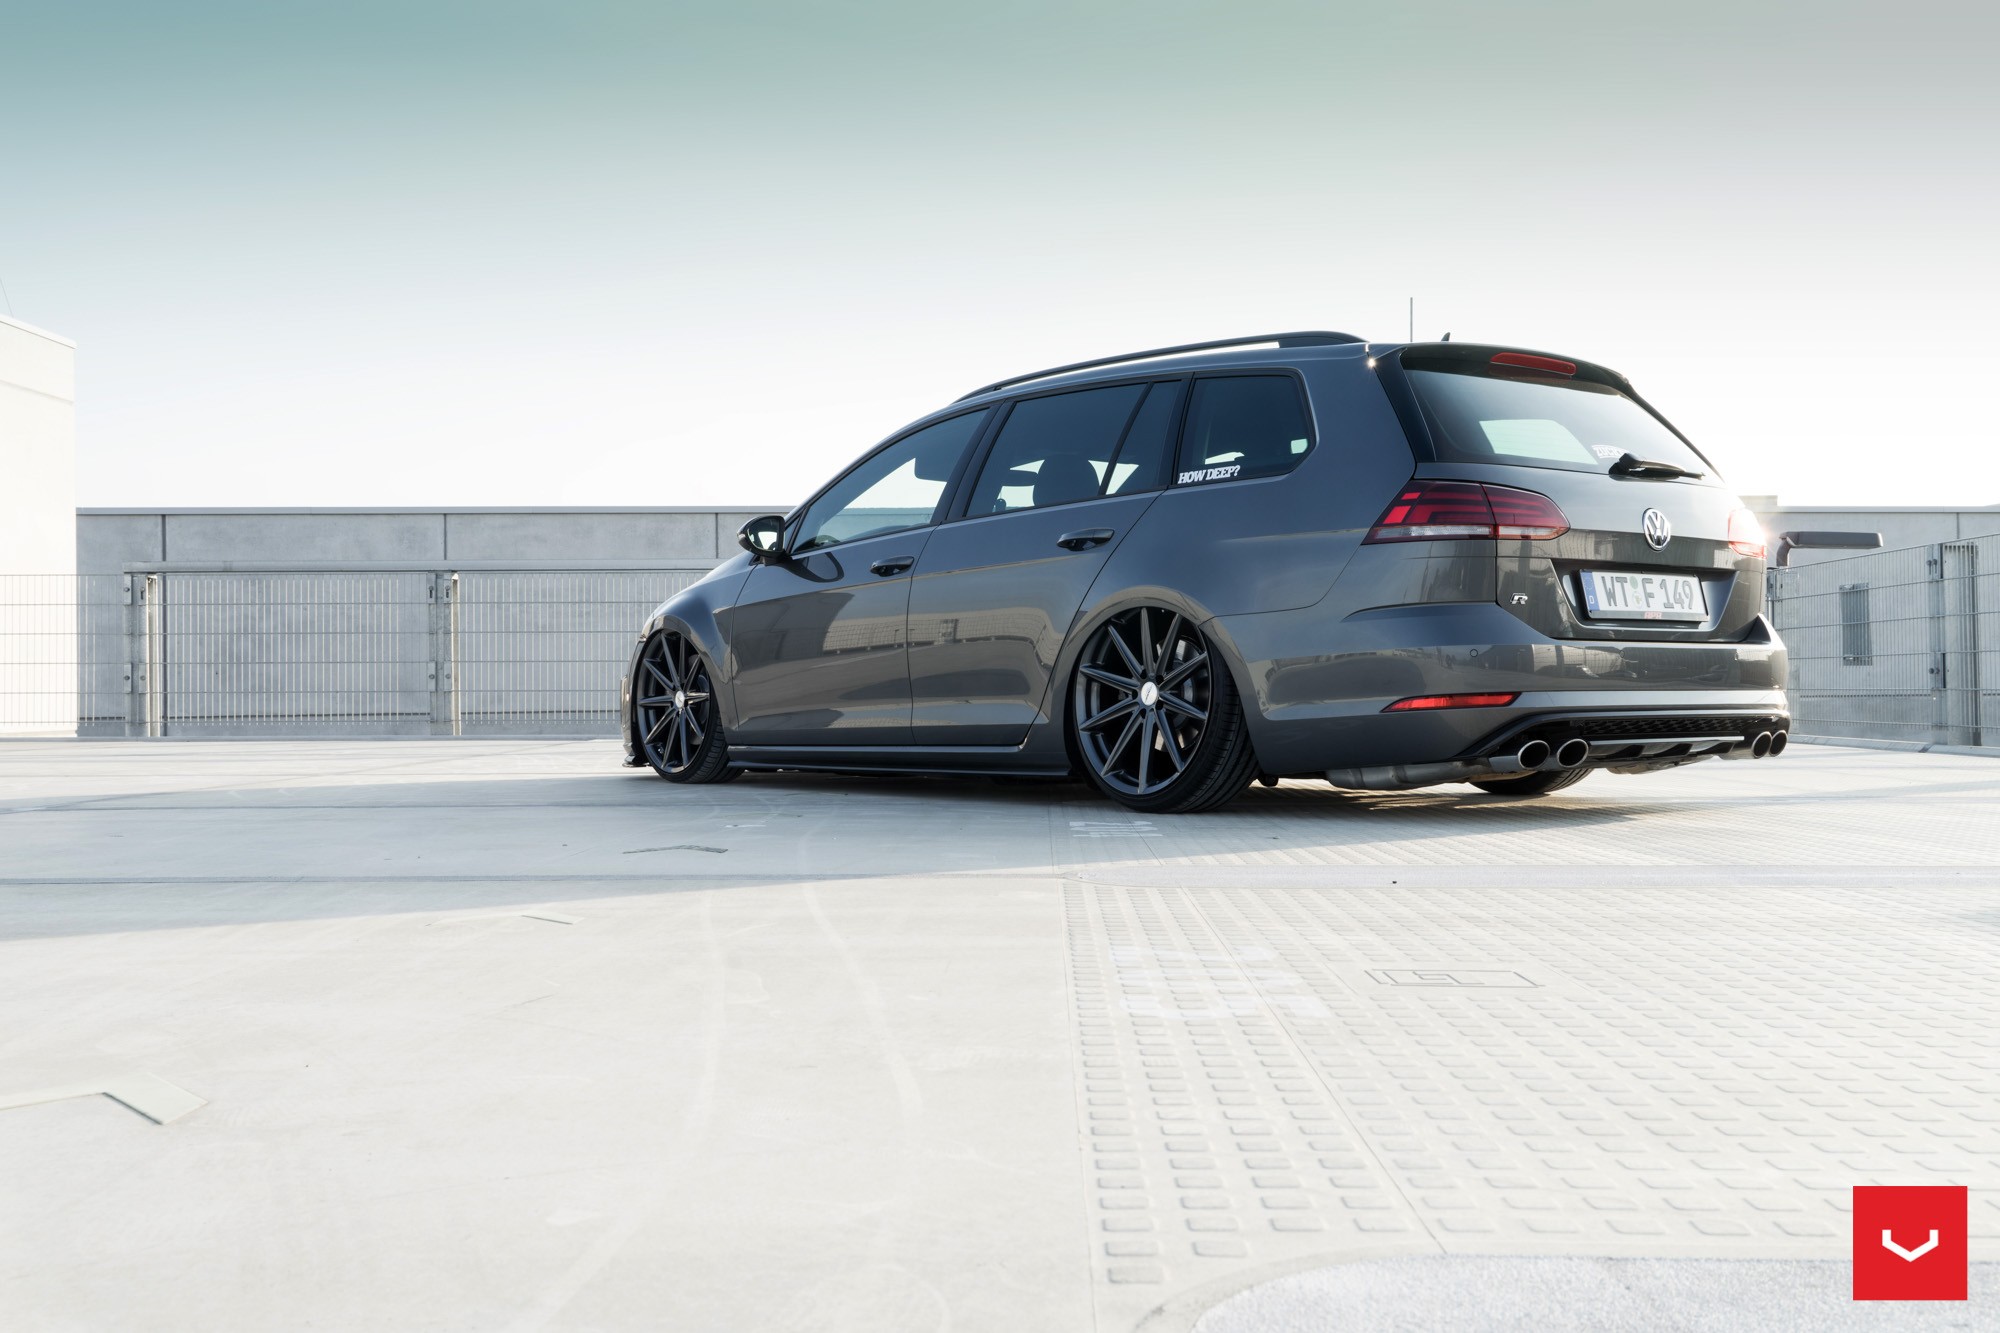 VW GOLF 7 R VARIANT BAGGED TUNING PROJECT🔧 